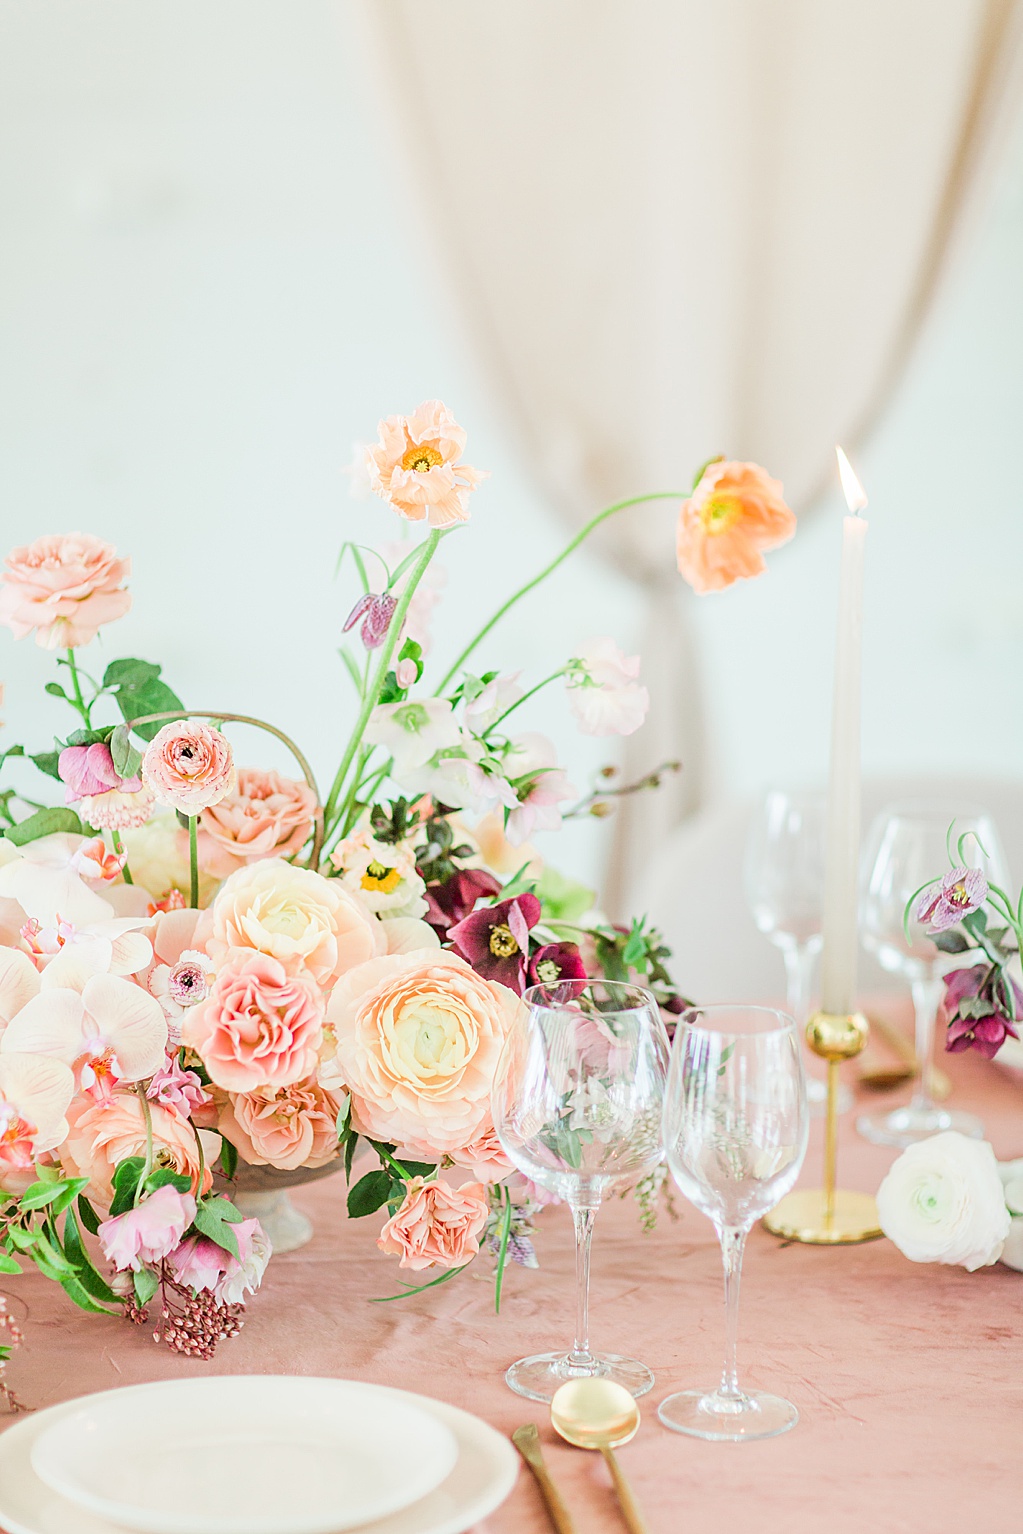 Blush mauve peach and coral wedding inspiration at Prospect House in Dripping Springs Texas wedding venue by Allison Jeffers Photography 0001